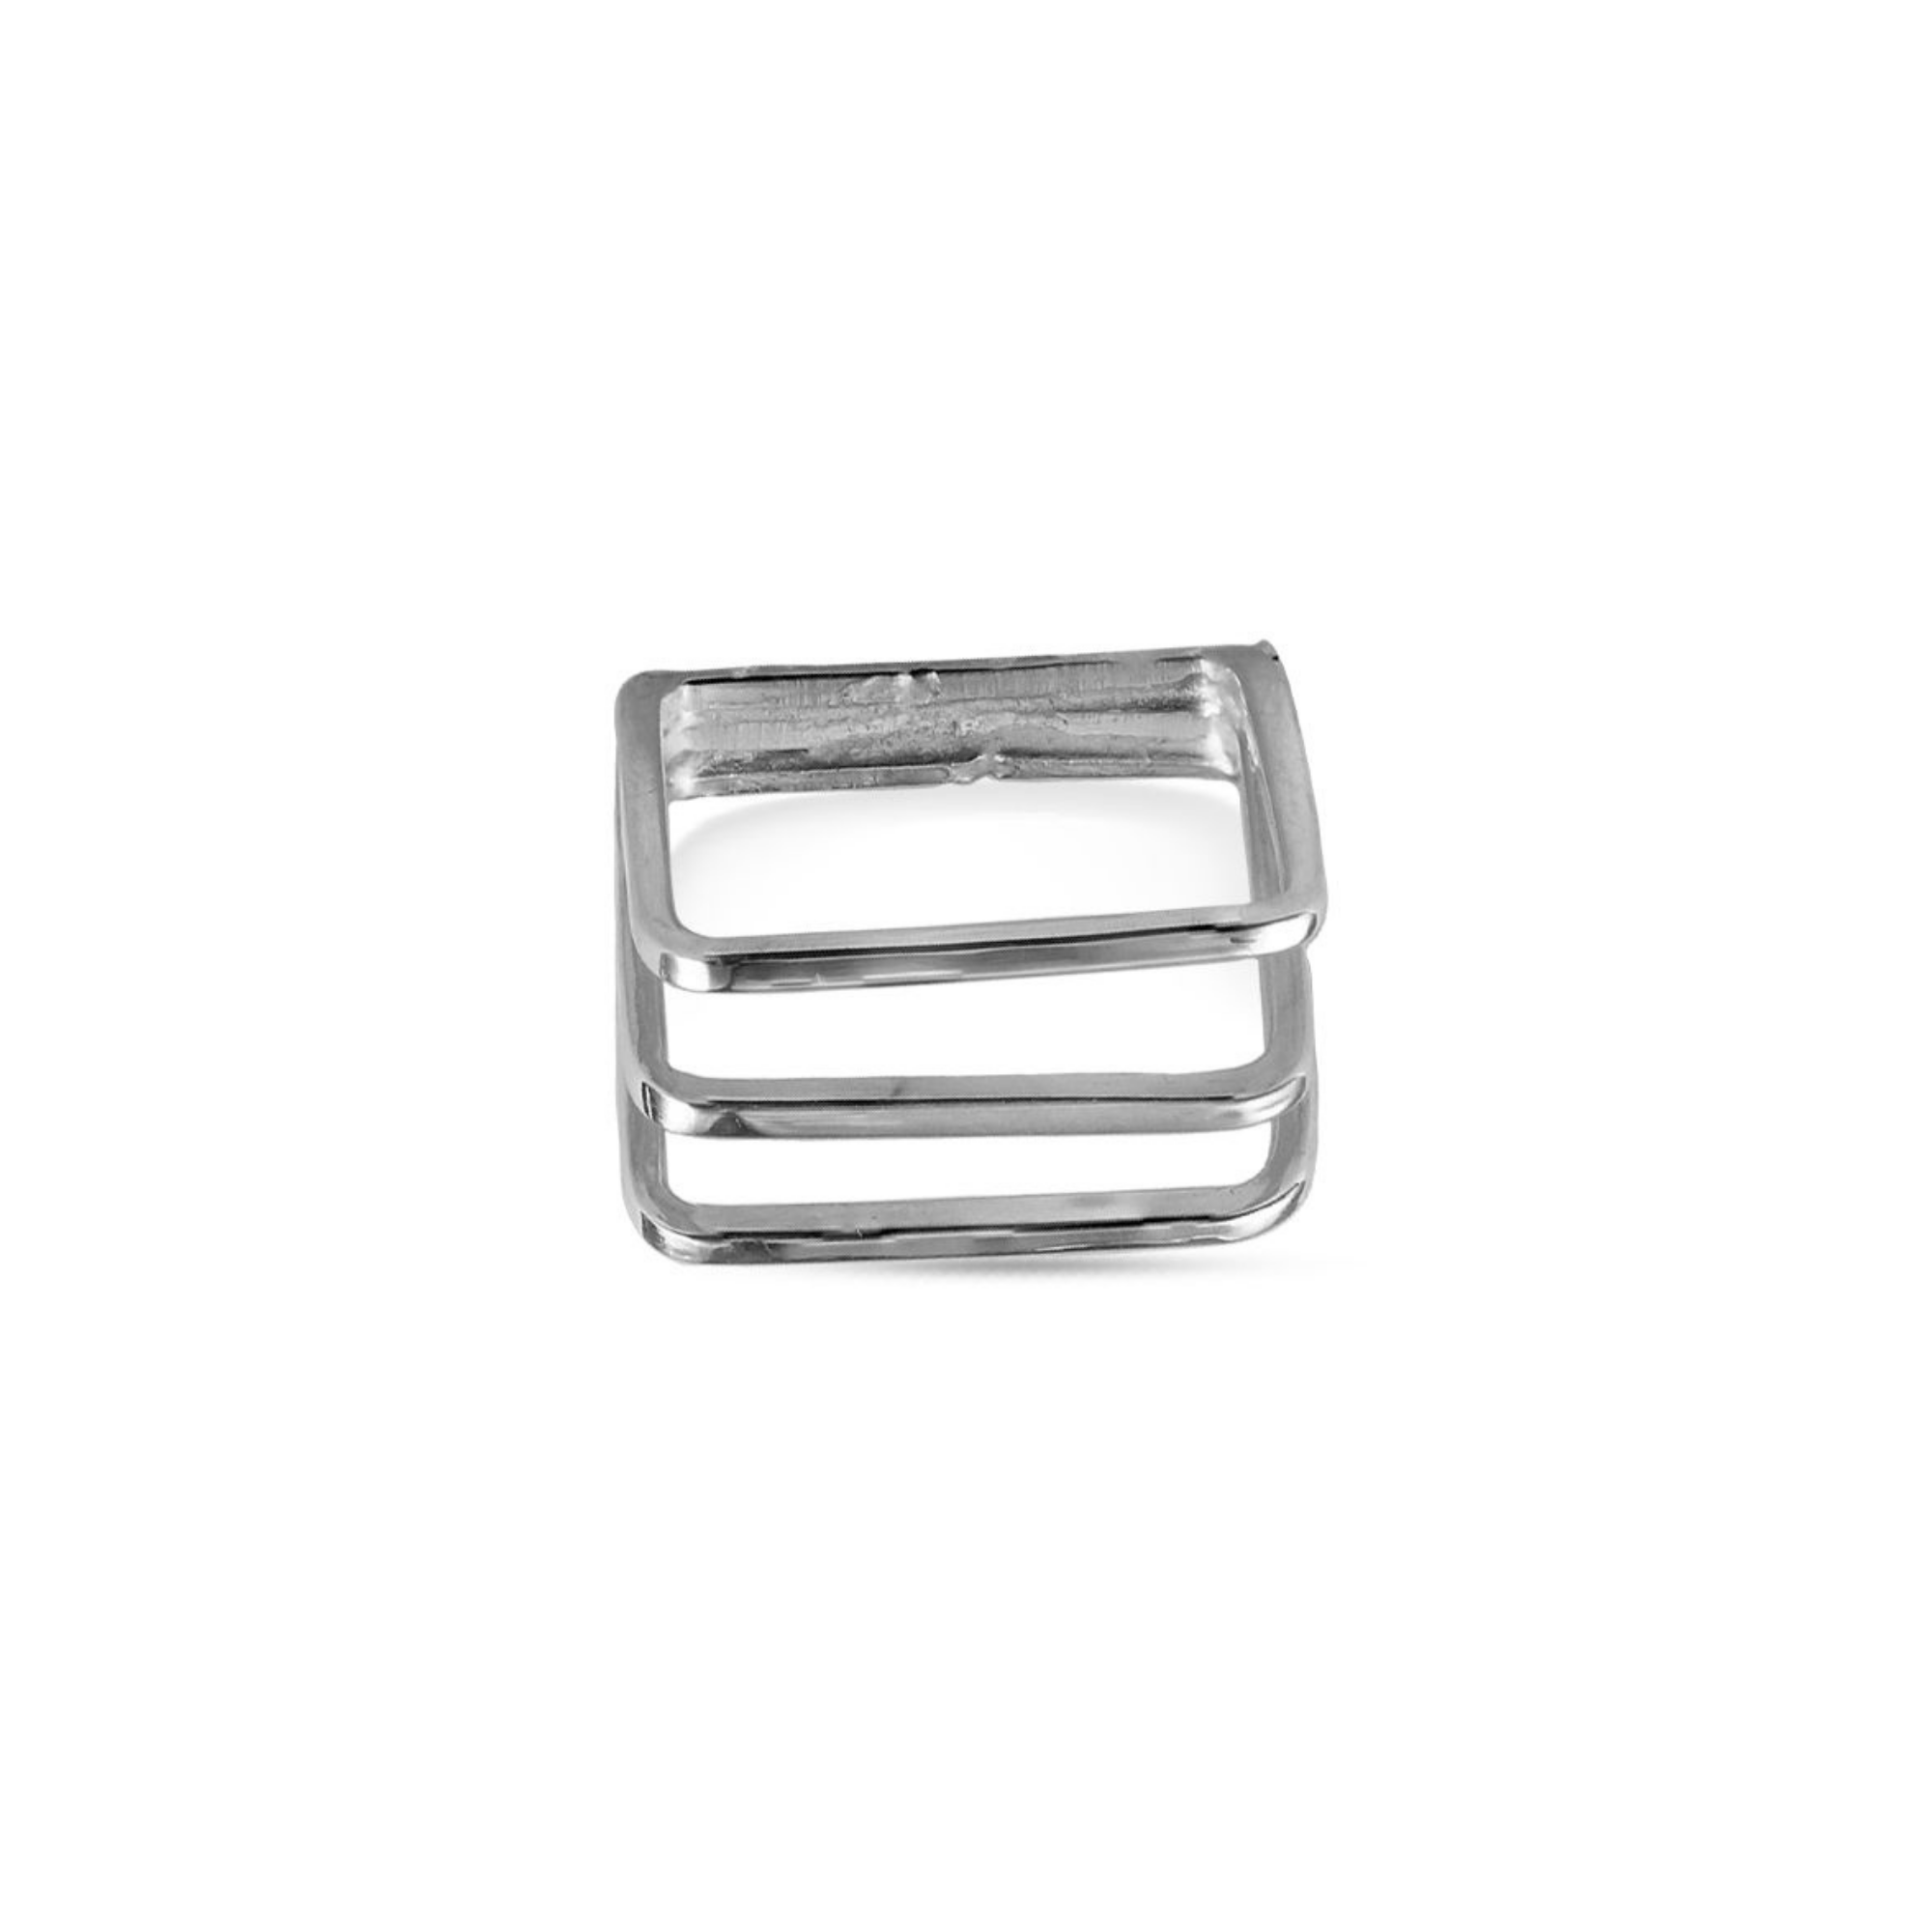 THE SILVER OPEN CAGE RING